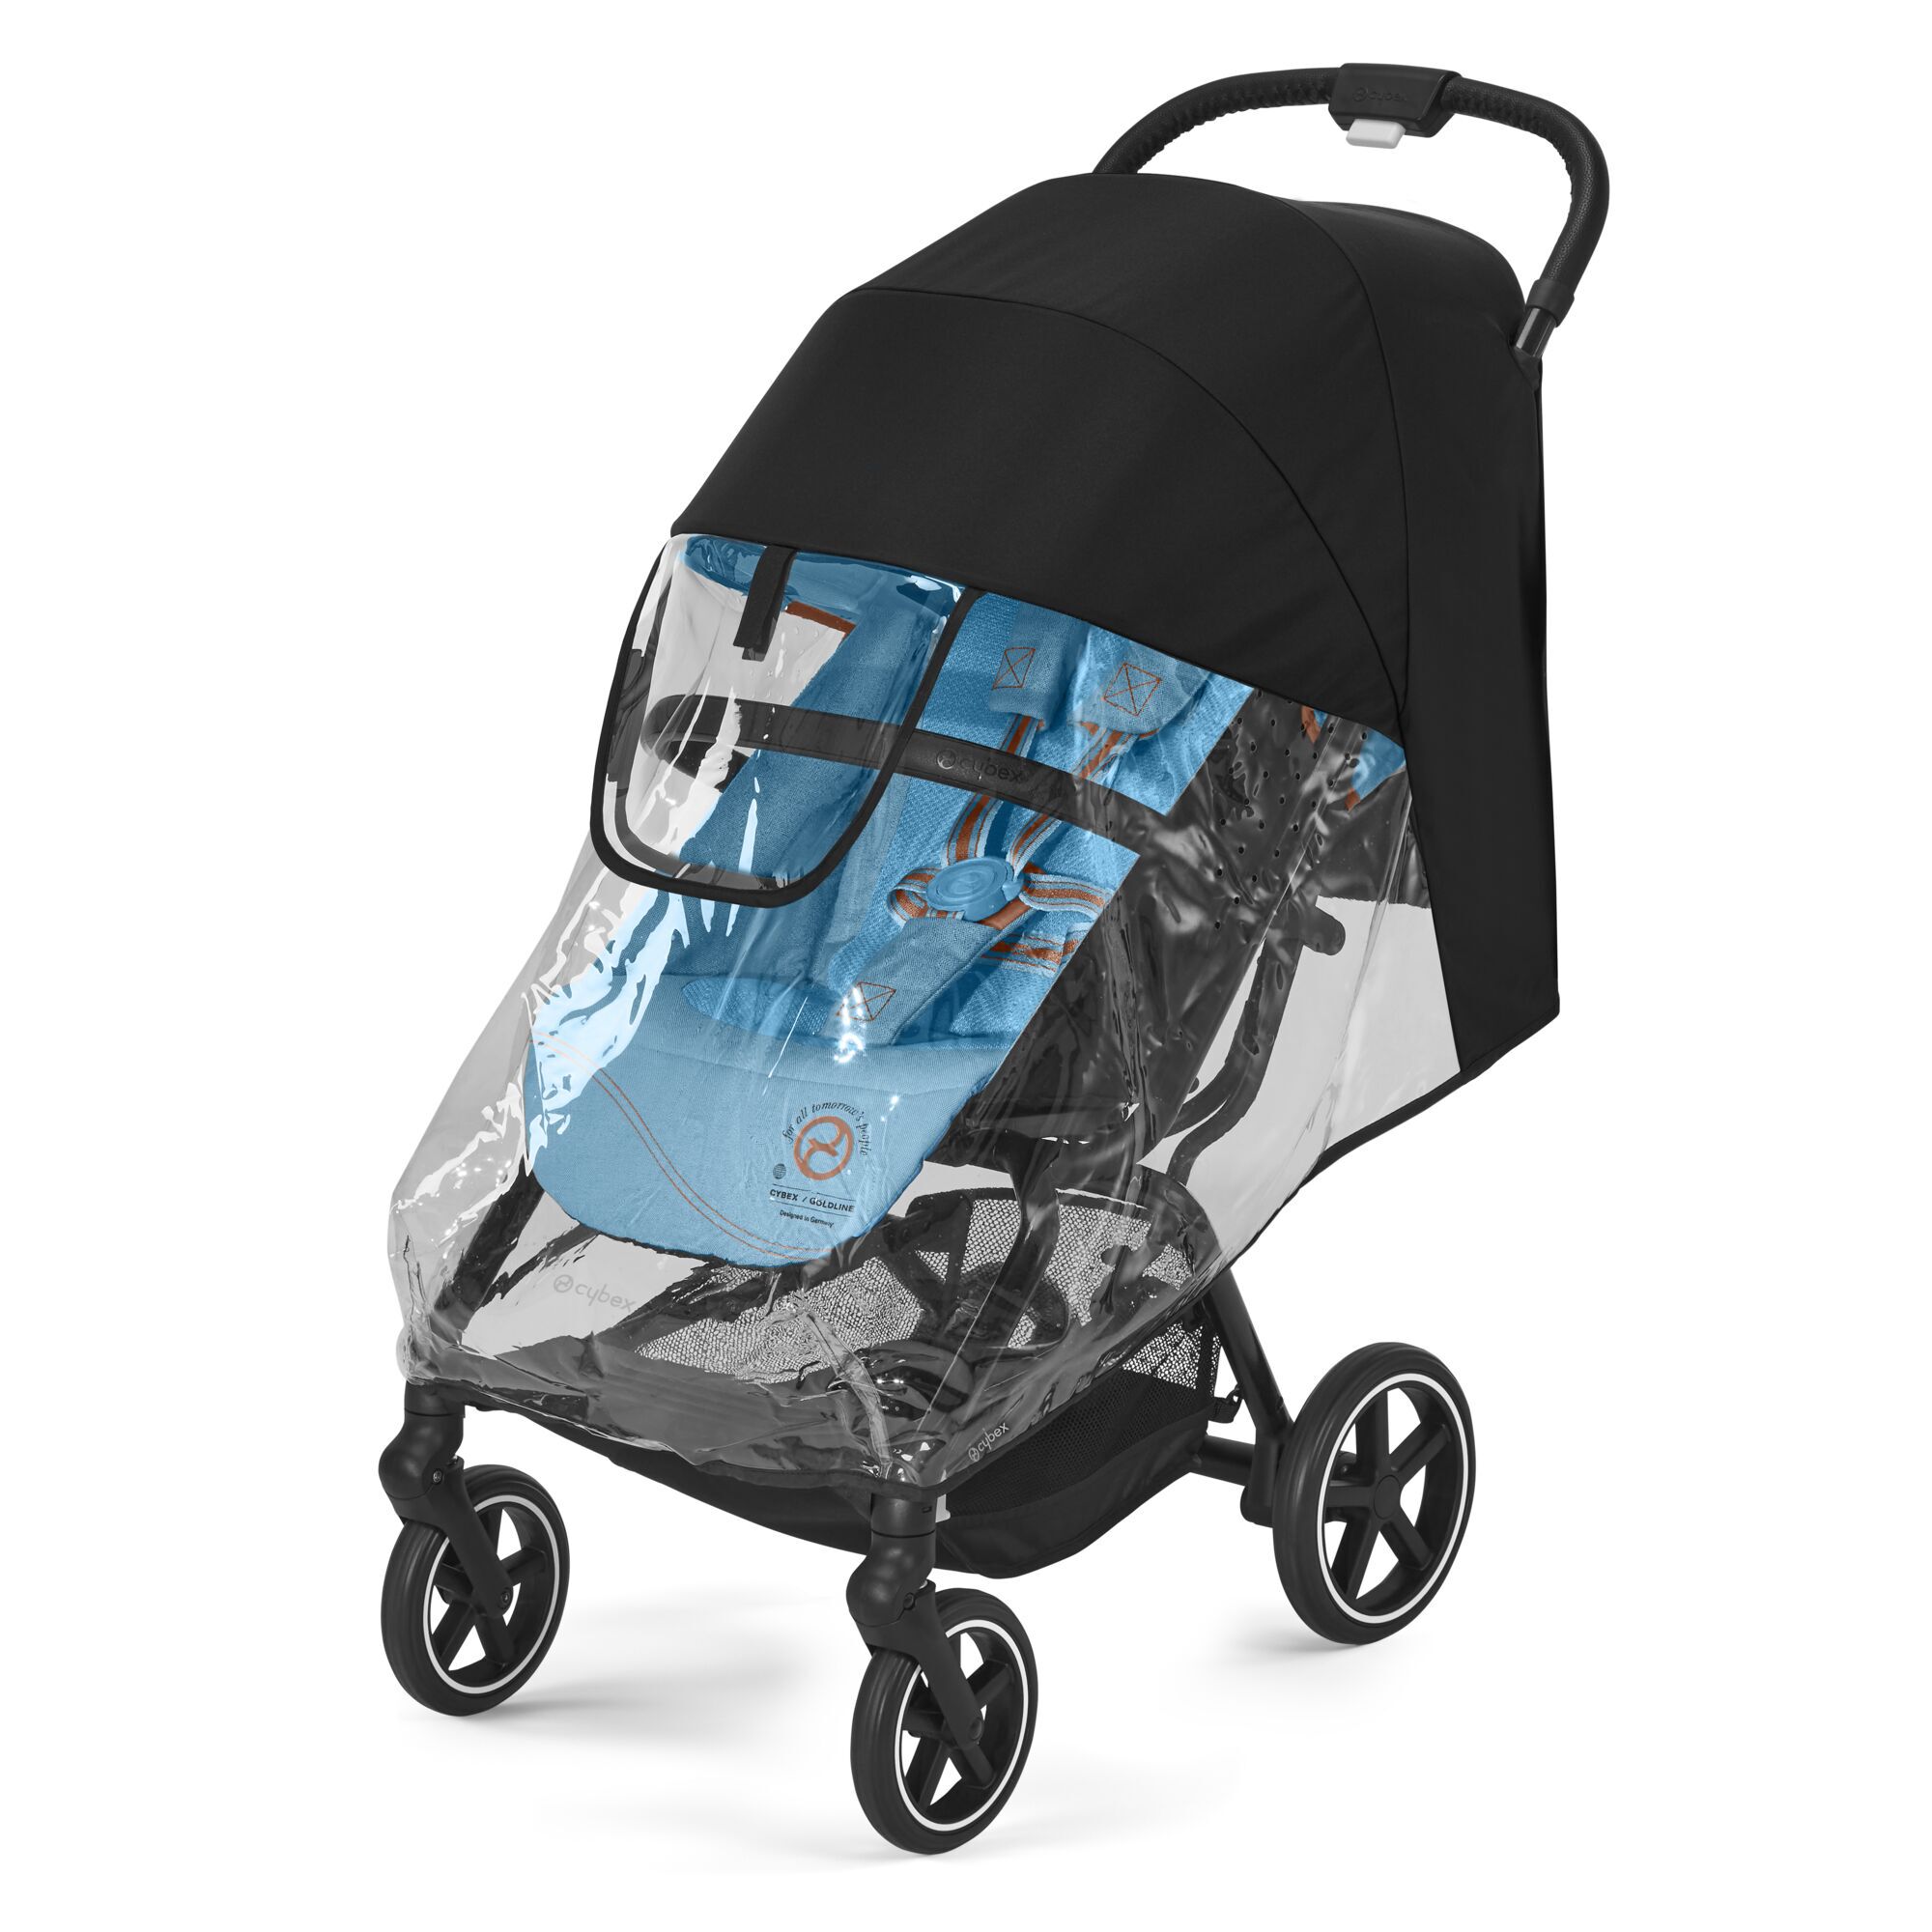 Rain Cover to fit BRITAX PRACTICALE SPORT PRAM PUSHCHAIR CARRYCOT 